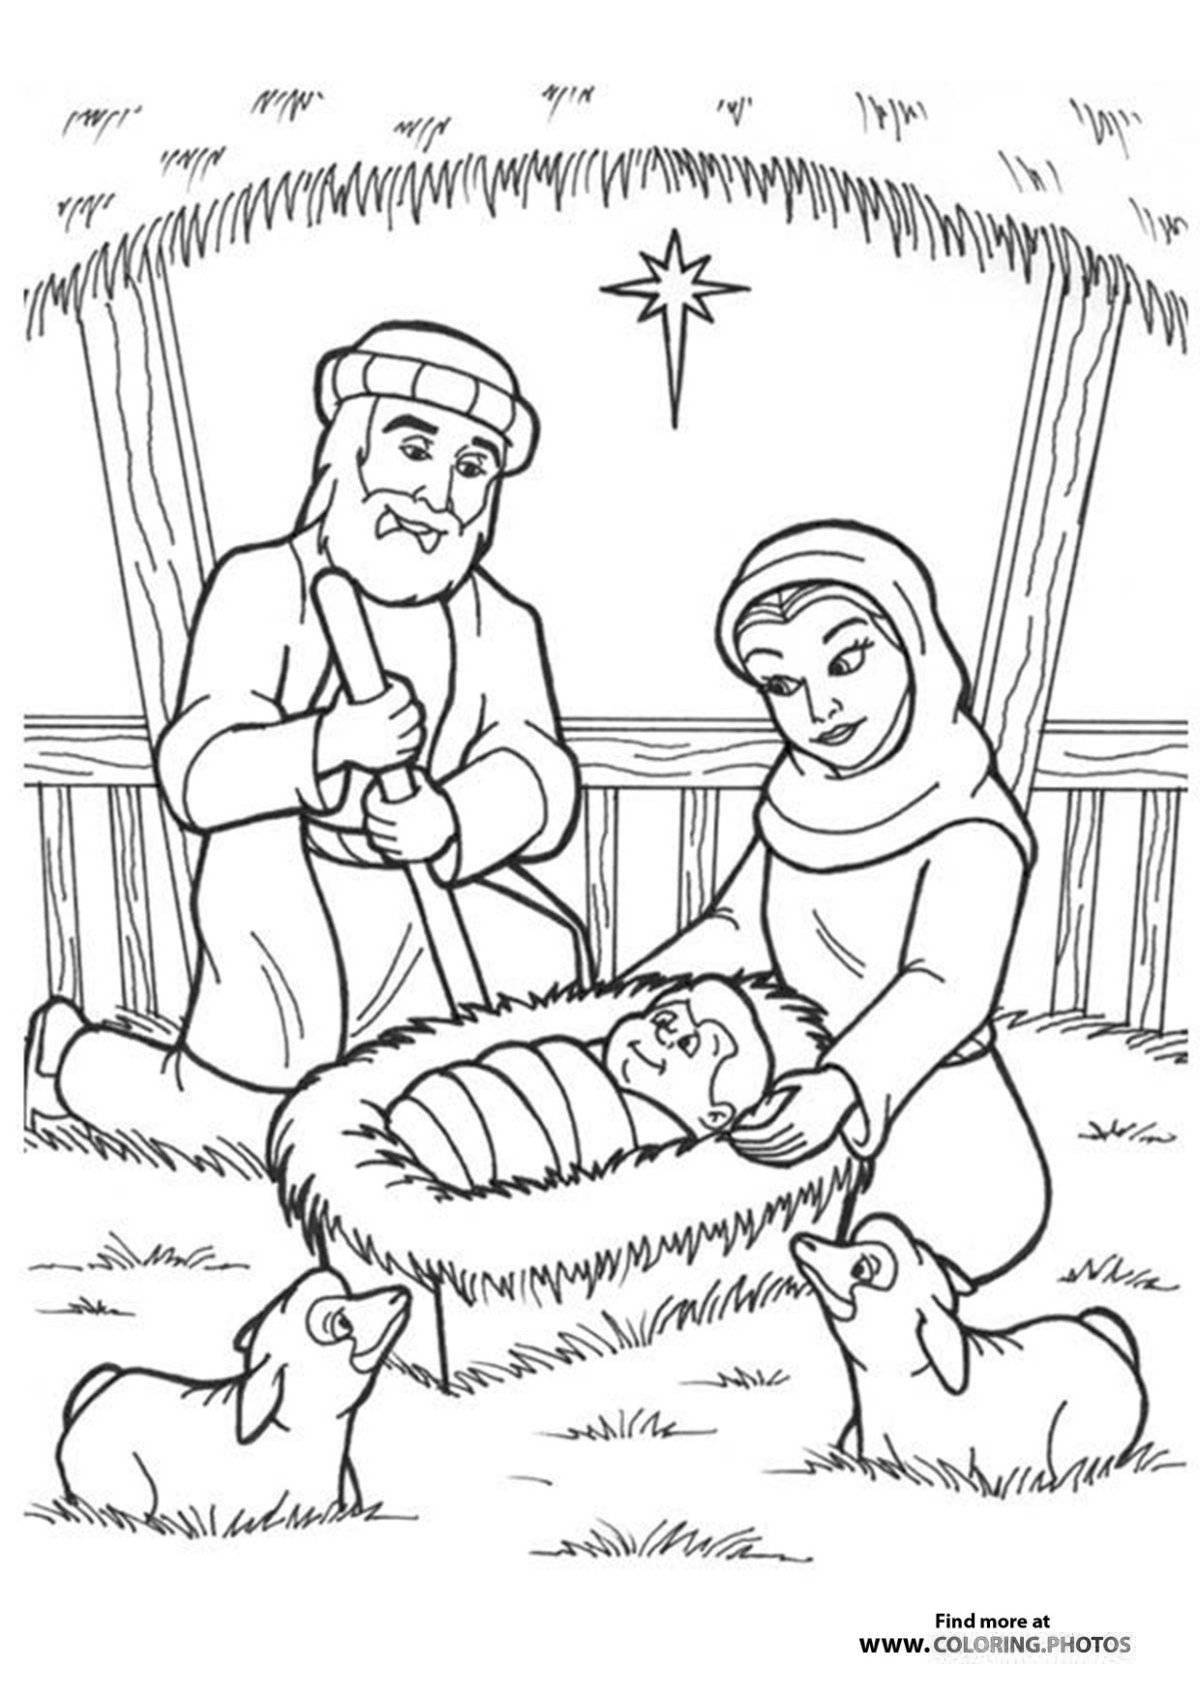 Coloring page blessed jesus in the manger